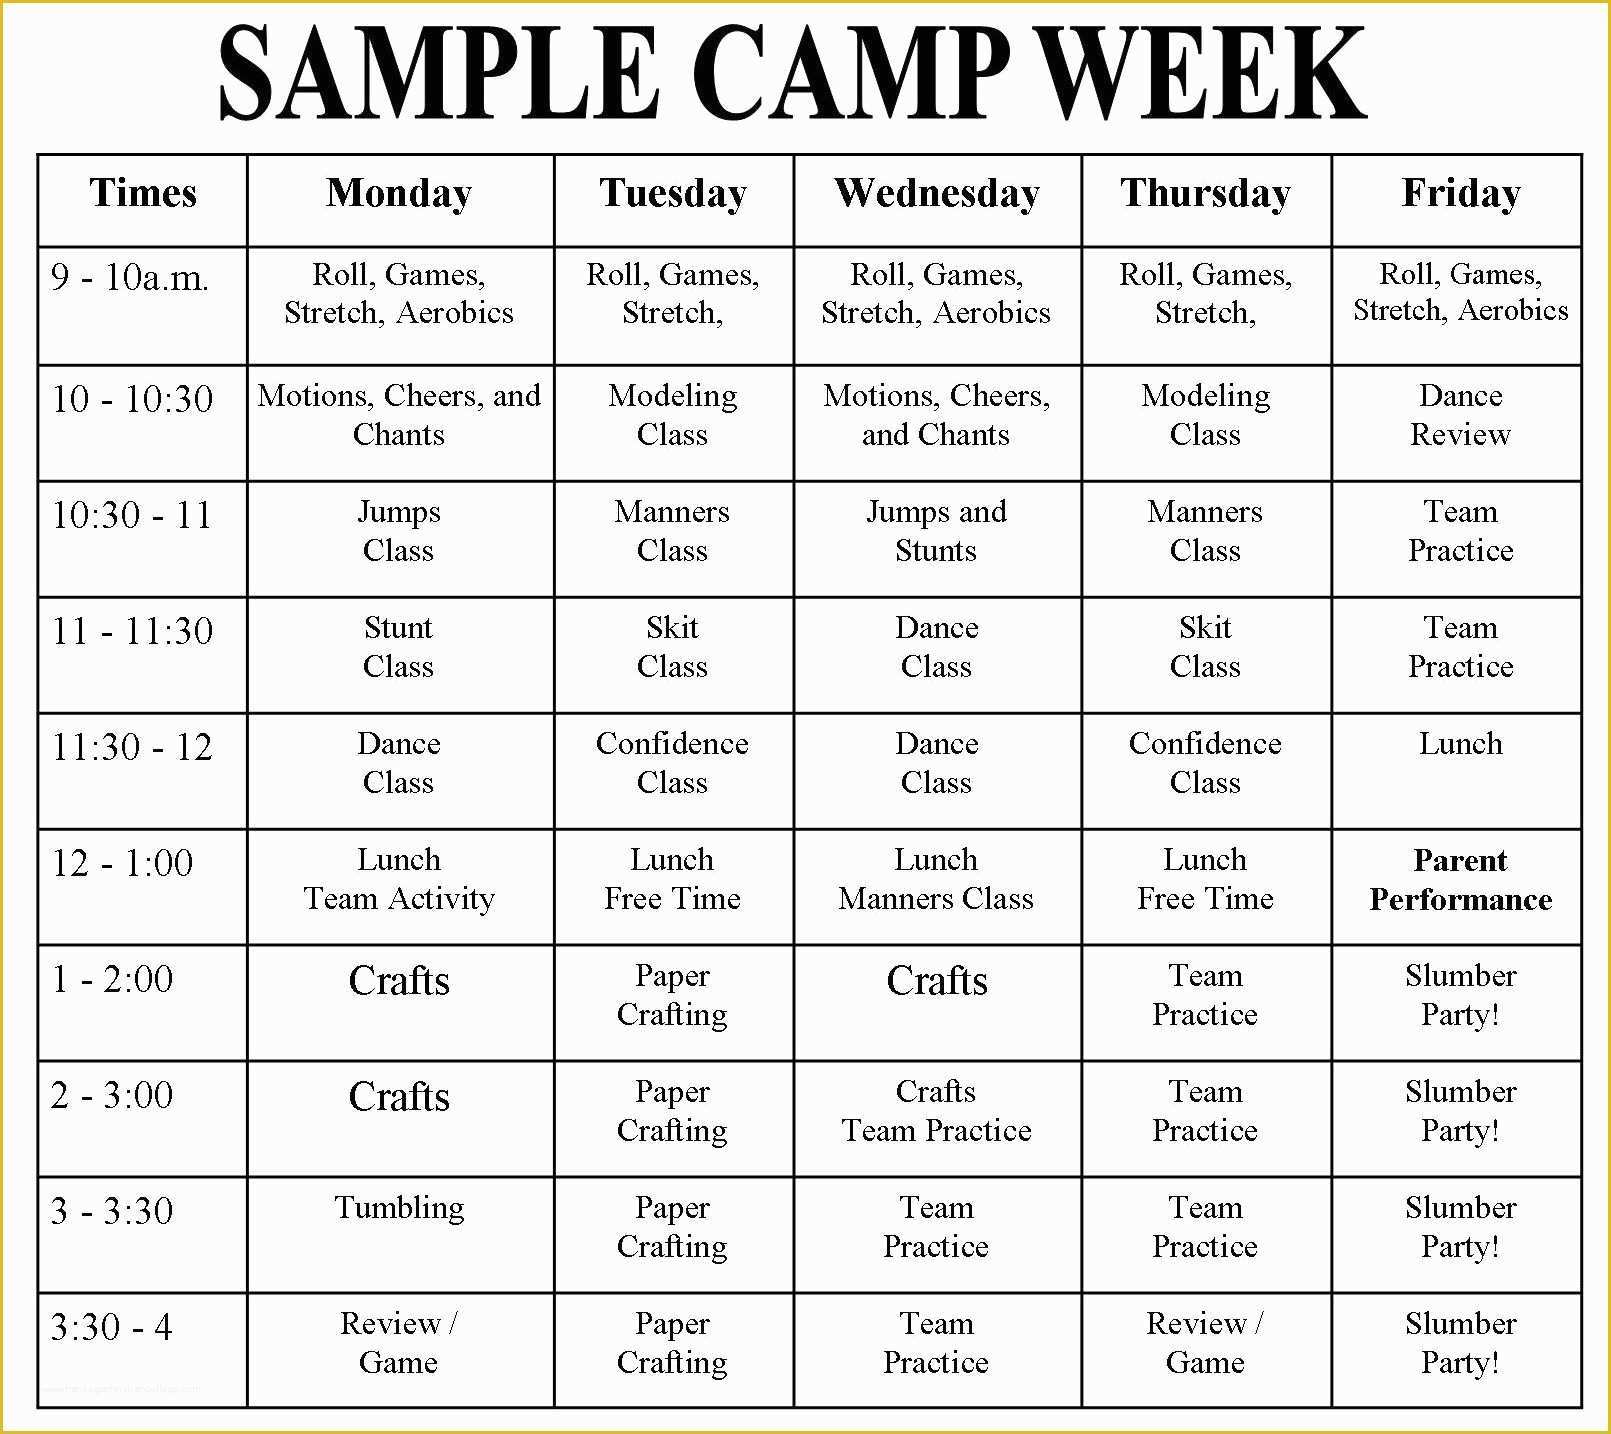 Free Business Plan Template for Summer Camp Of Dance Camp Games